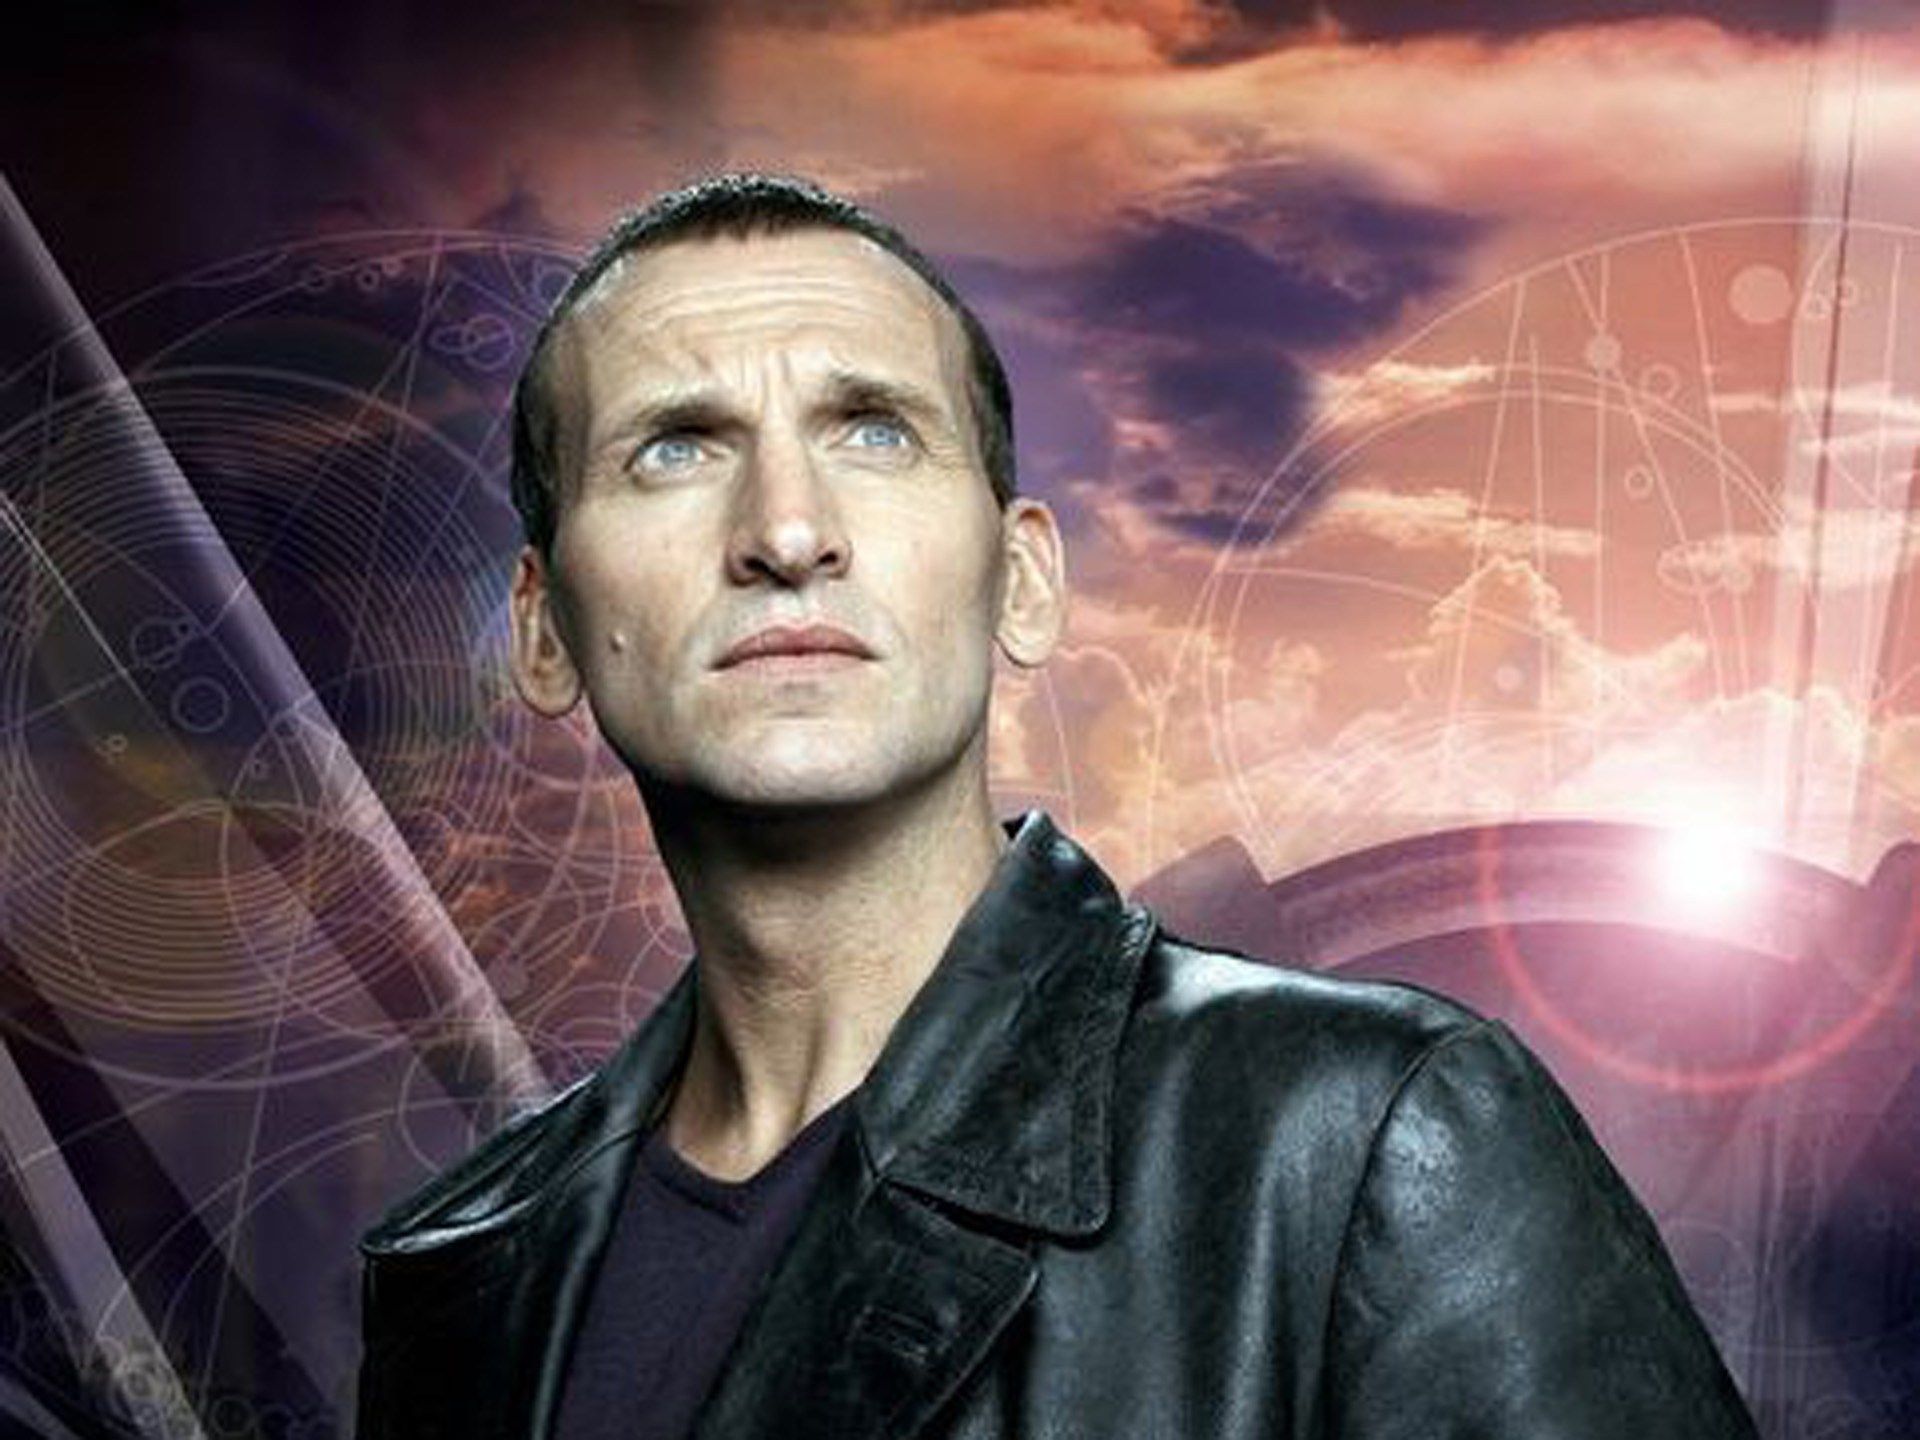 Don't skip him! All 10 Stories from the Ninth Doctor Ranked